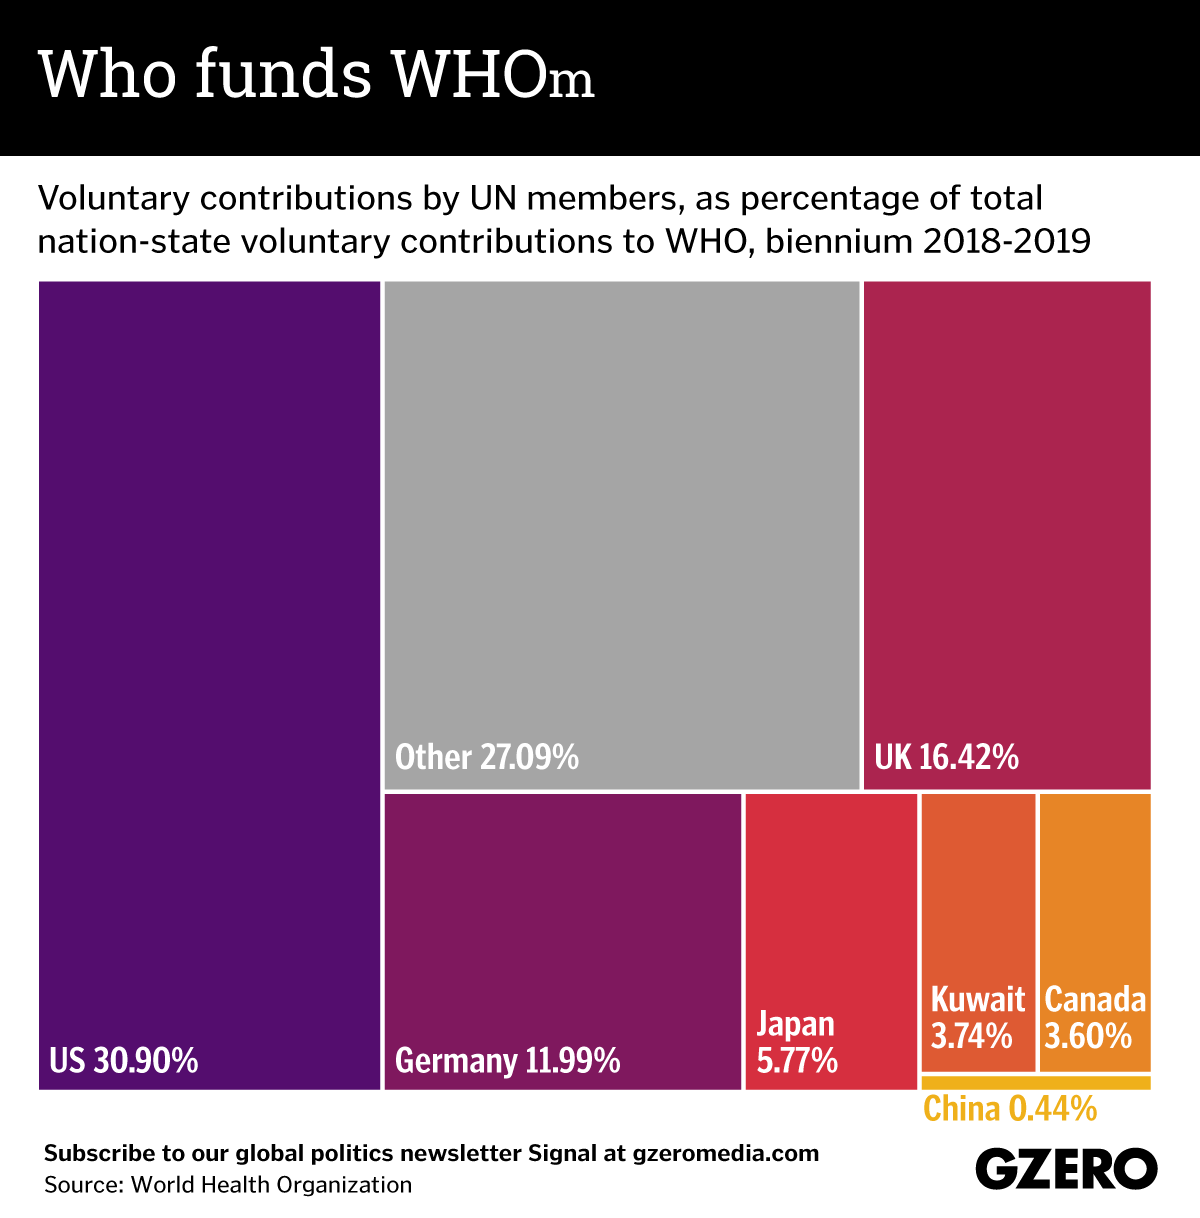 The Graphic Truth: Who funds WHOm